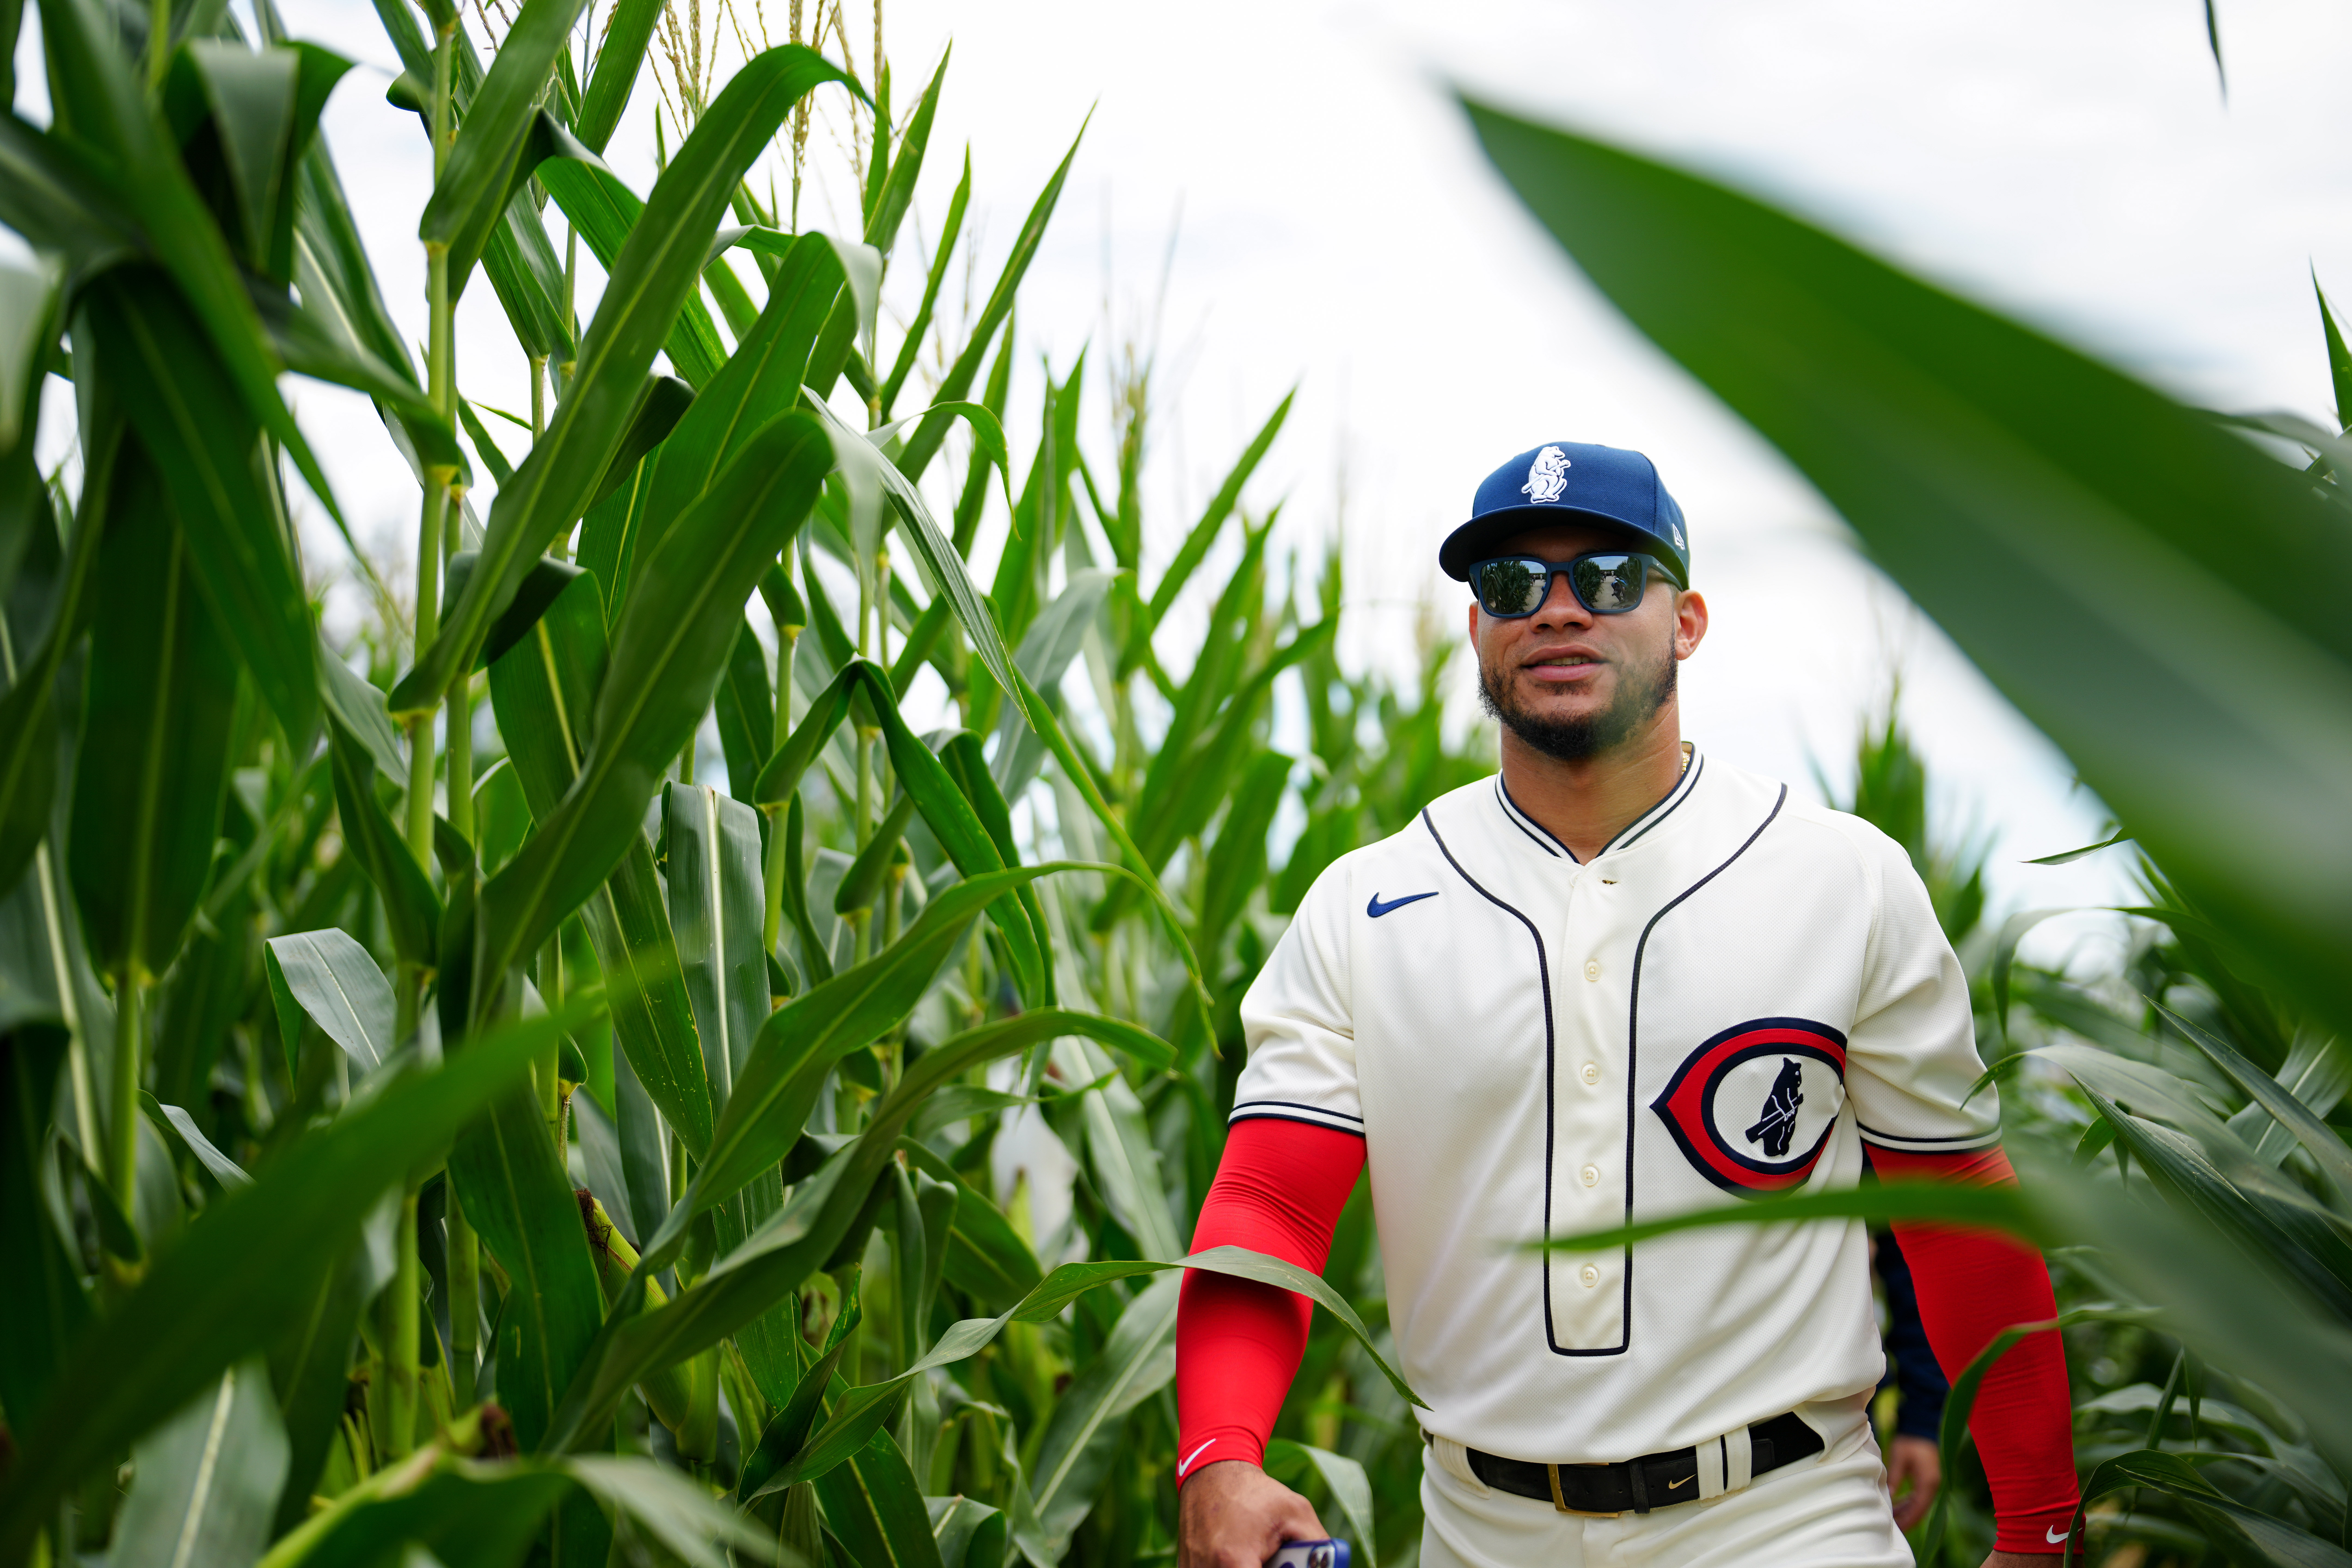 Field of Dreams game 2022: Chicago Cubs vs. Cincinnati Reds TV, live  stream, updates and highlights